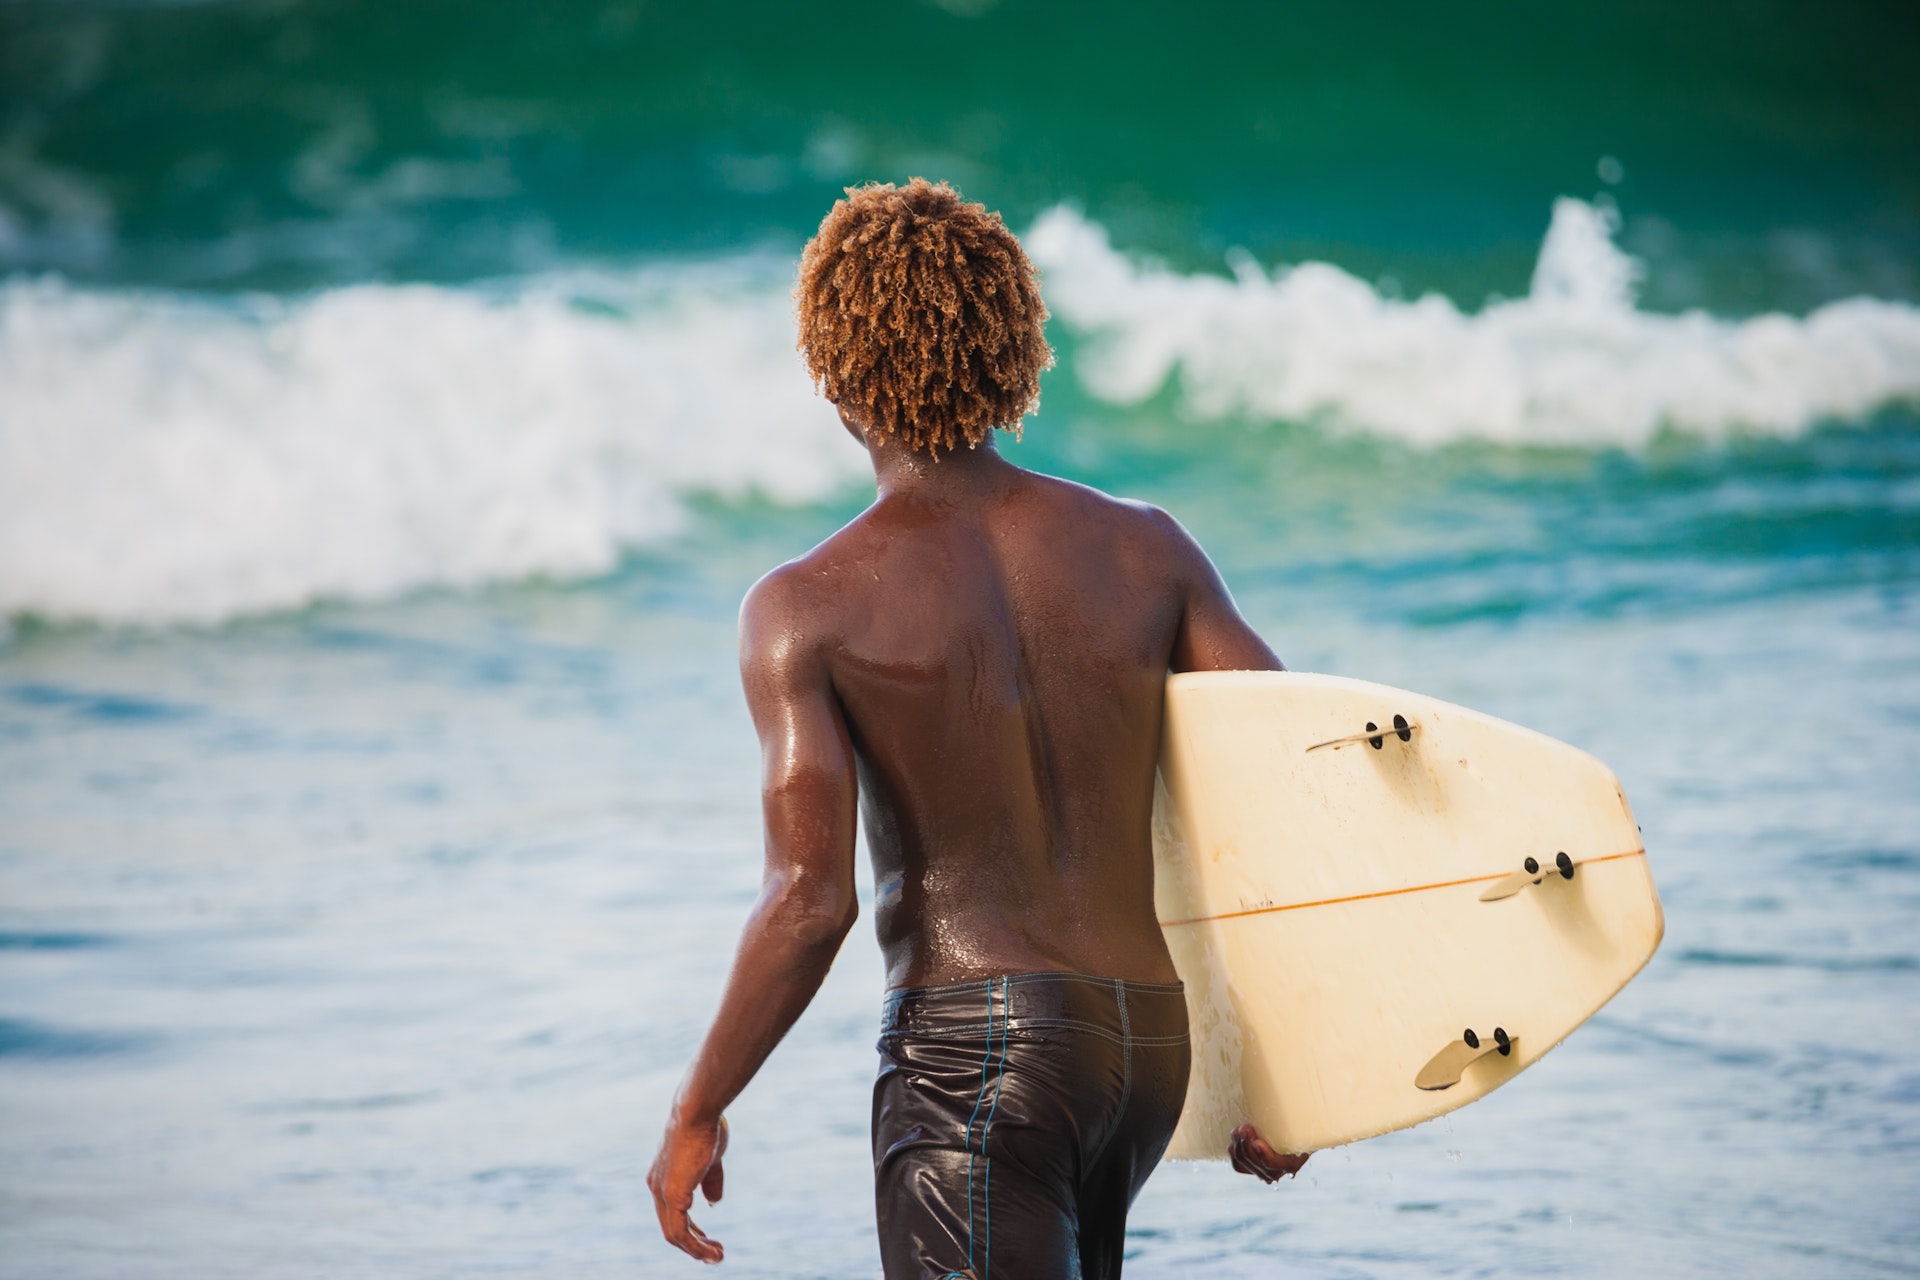 Young adult male surfer studying the waves before entering, seen from behind.